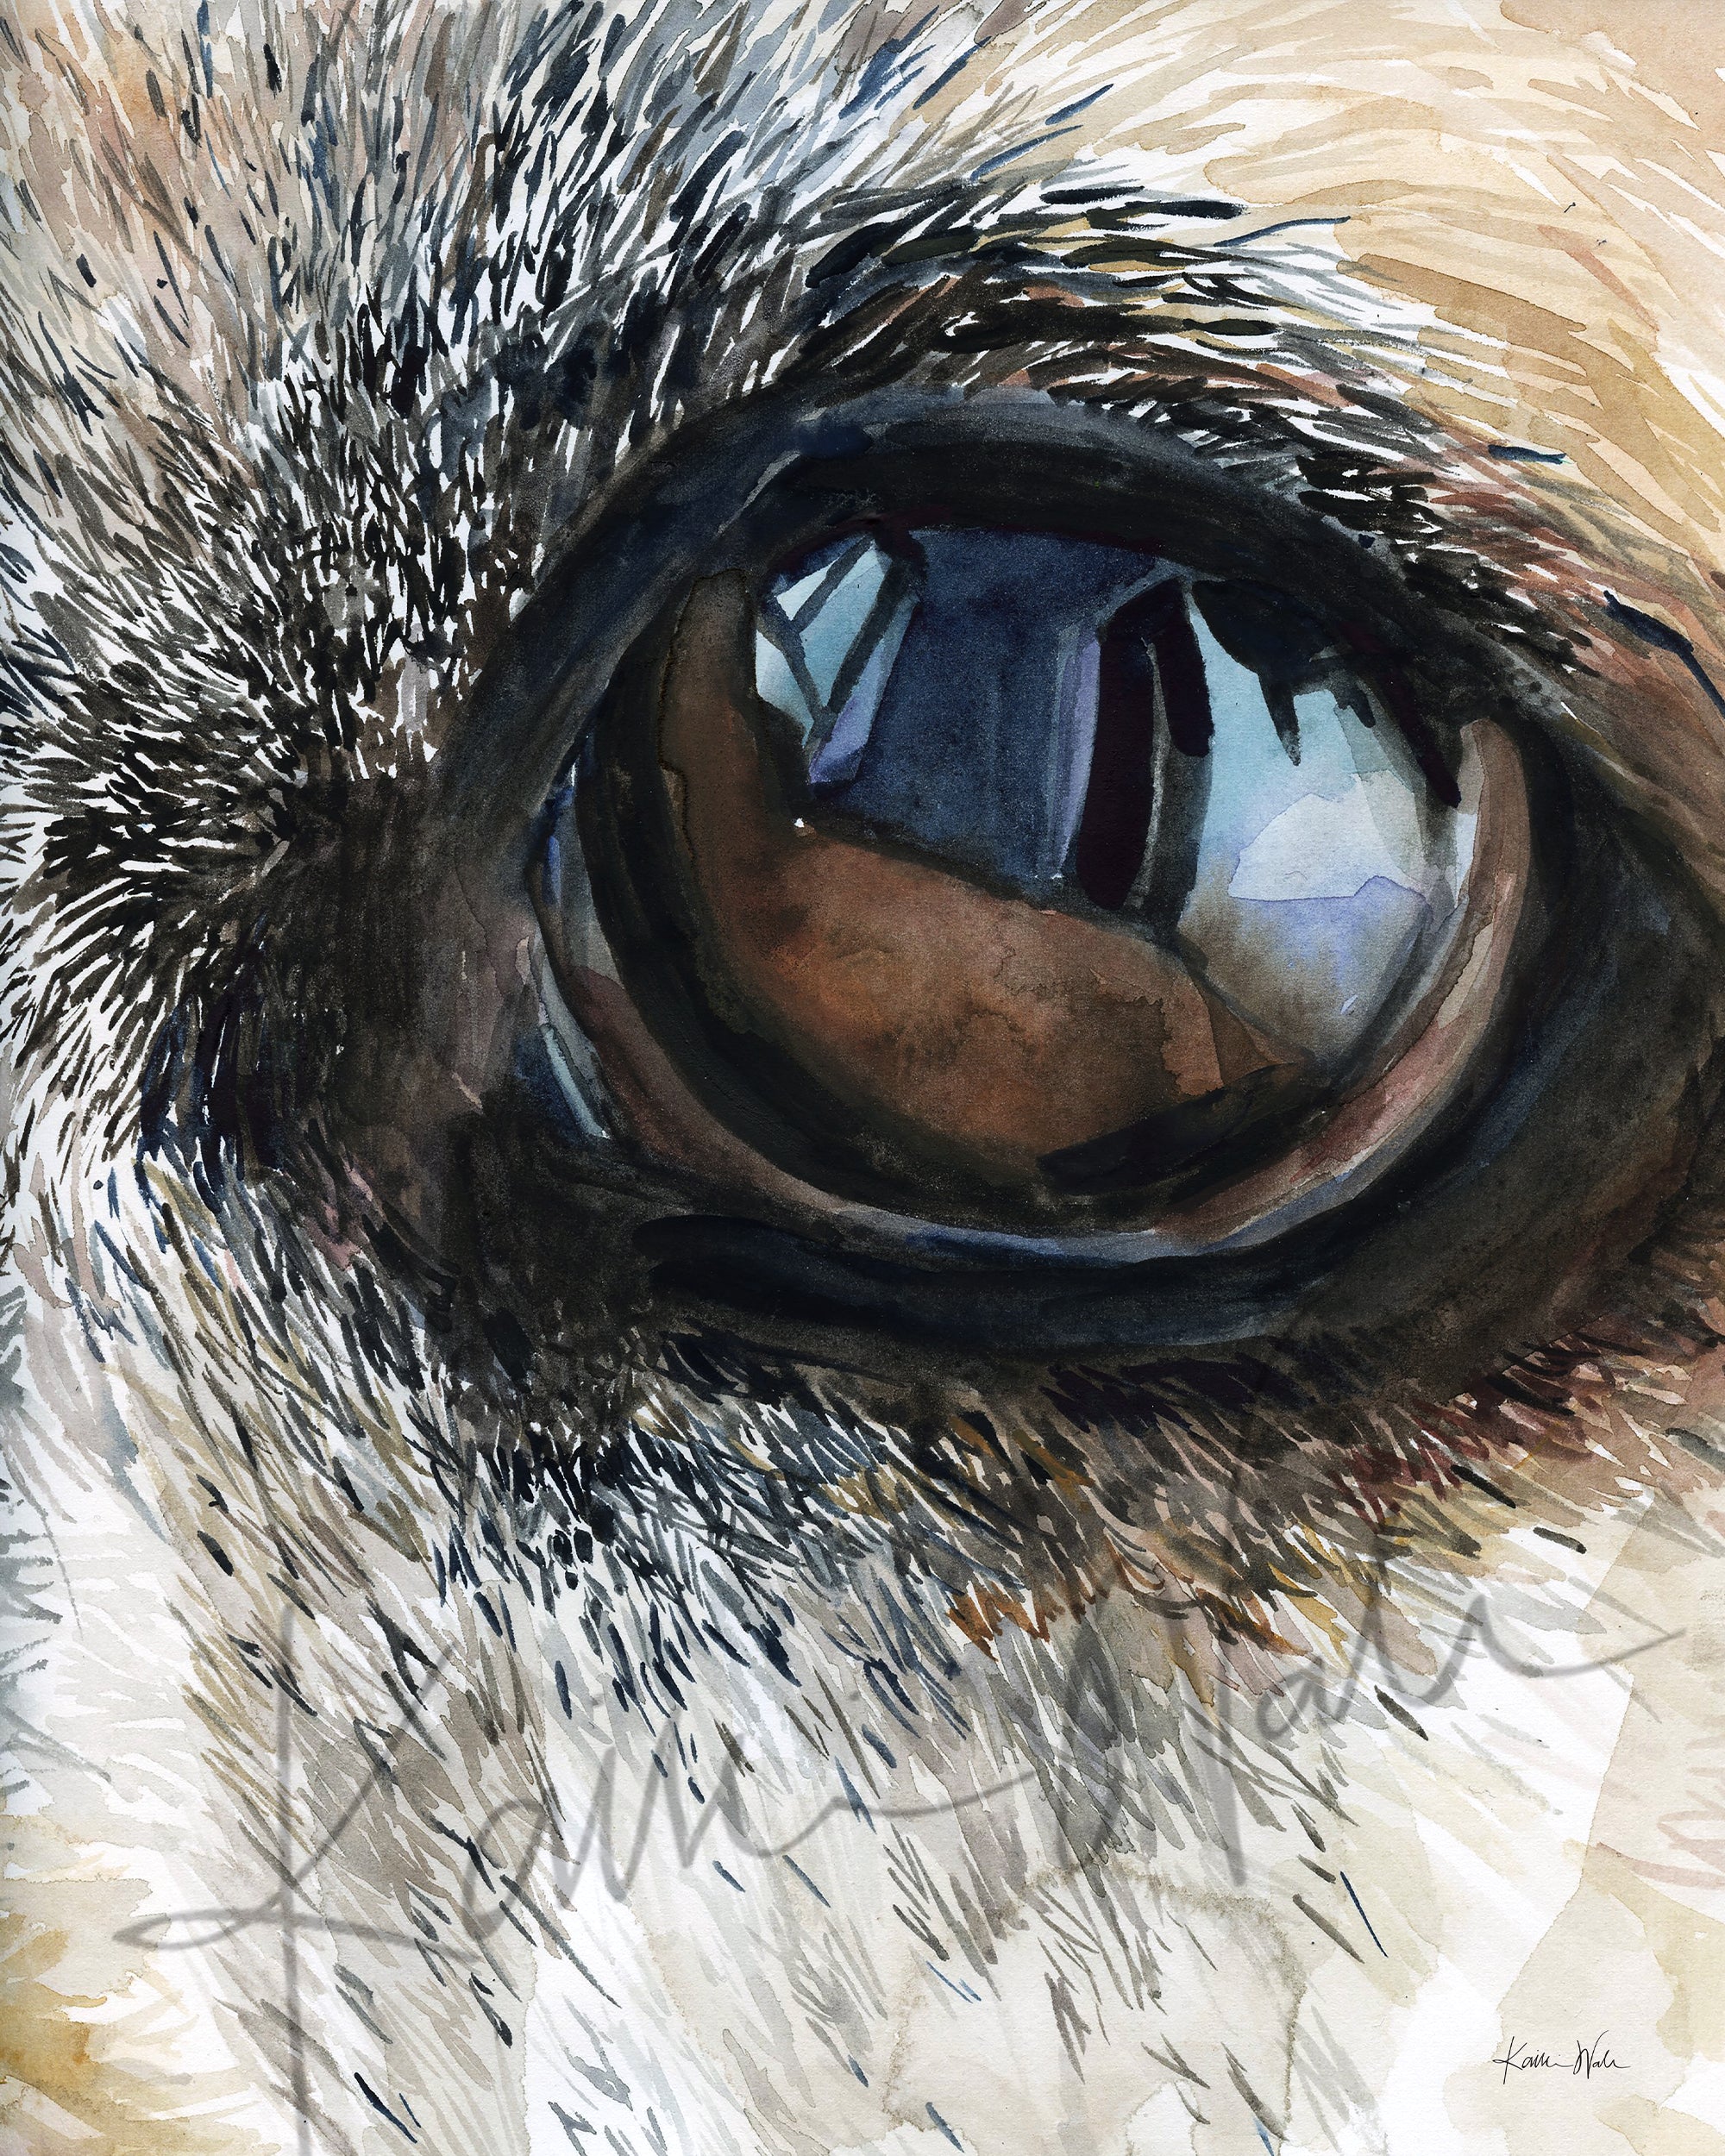 Unframed watercolor painting of a zoomed in perspective of a dog’s eye. The painting is in blacks, tans, and browns.